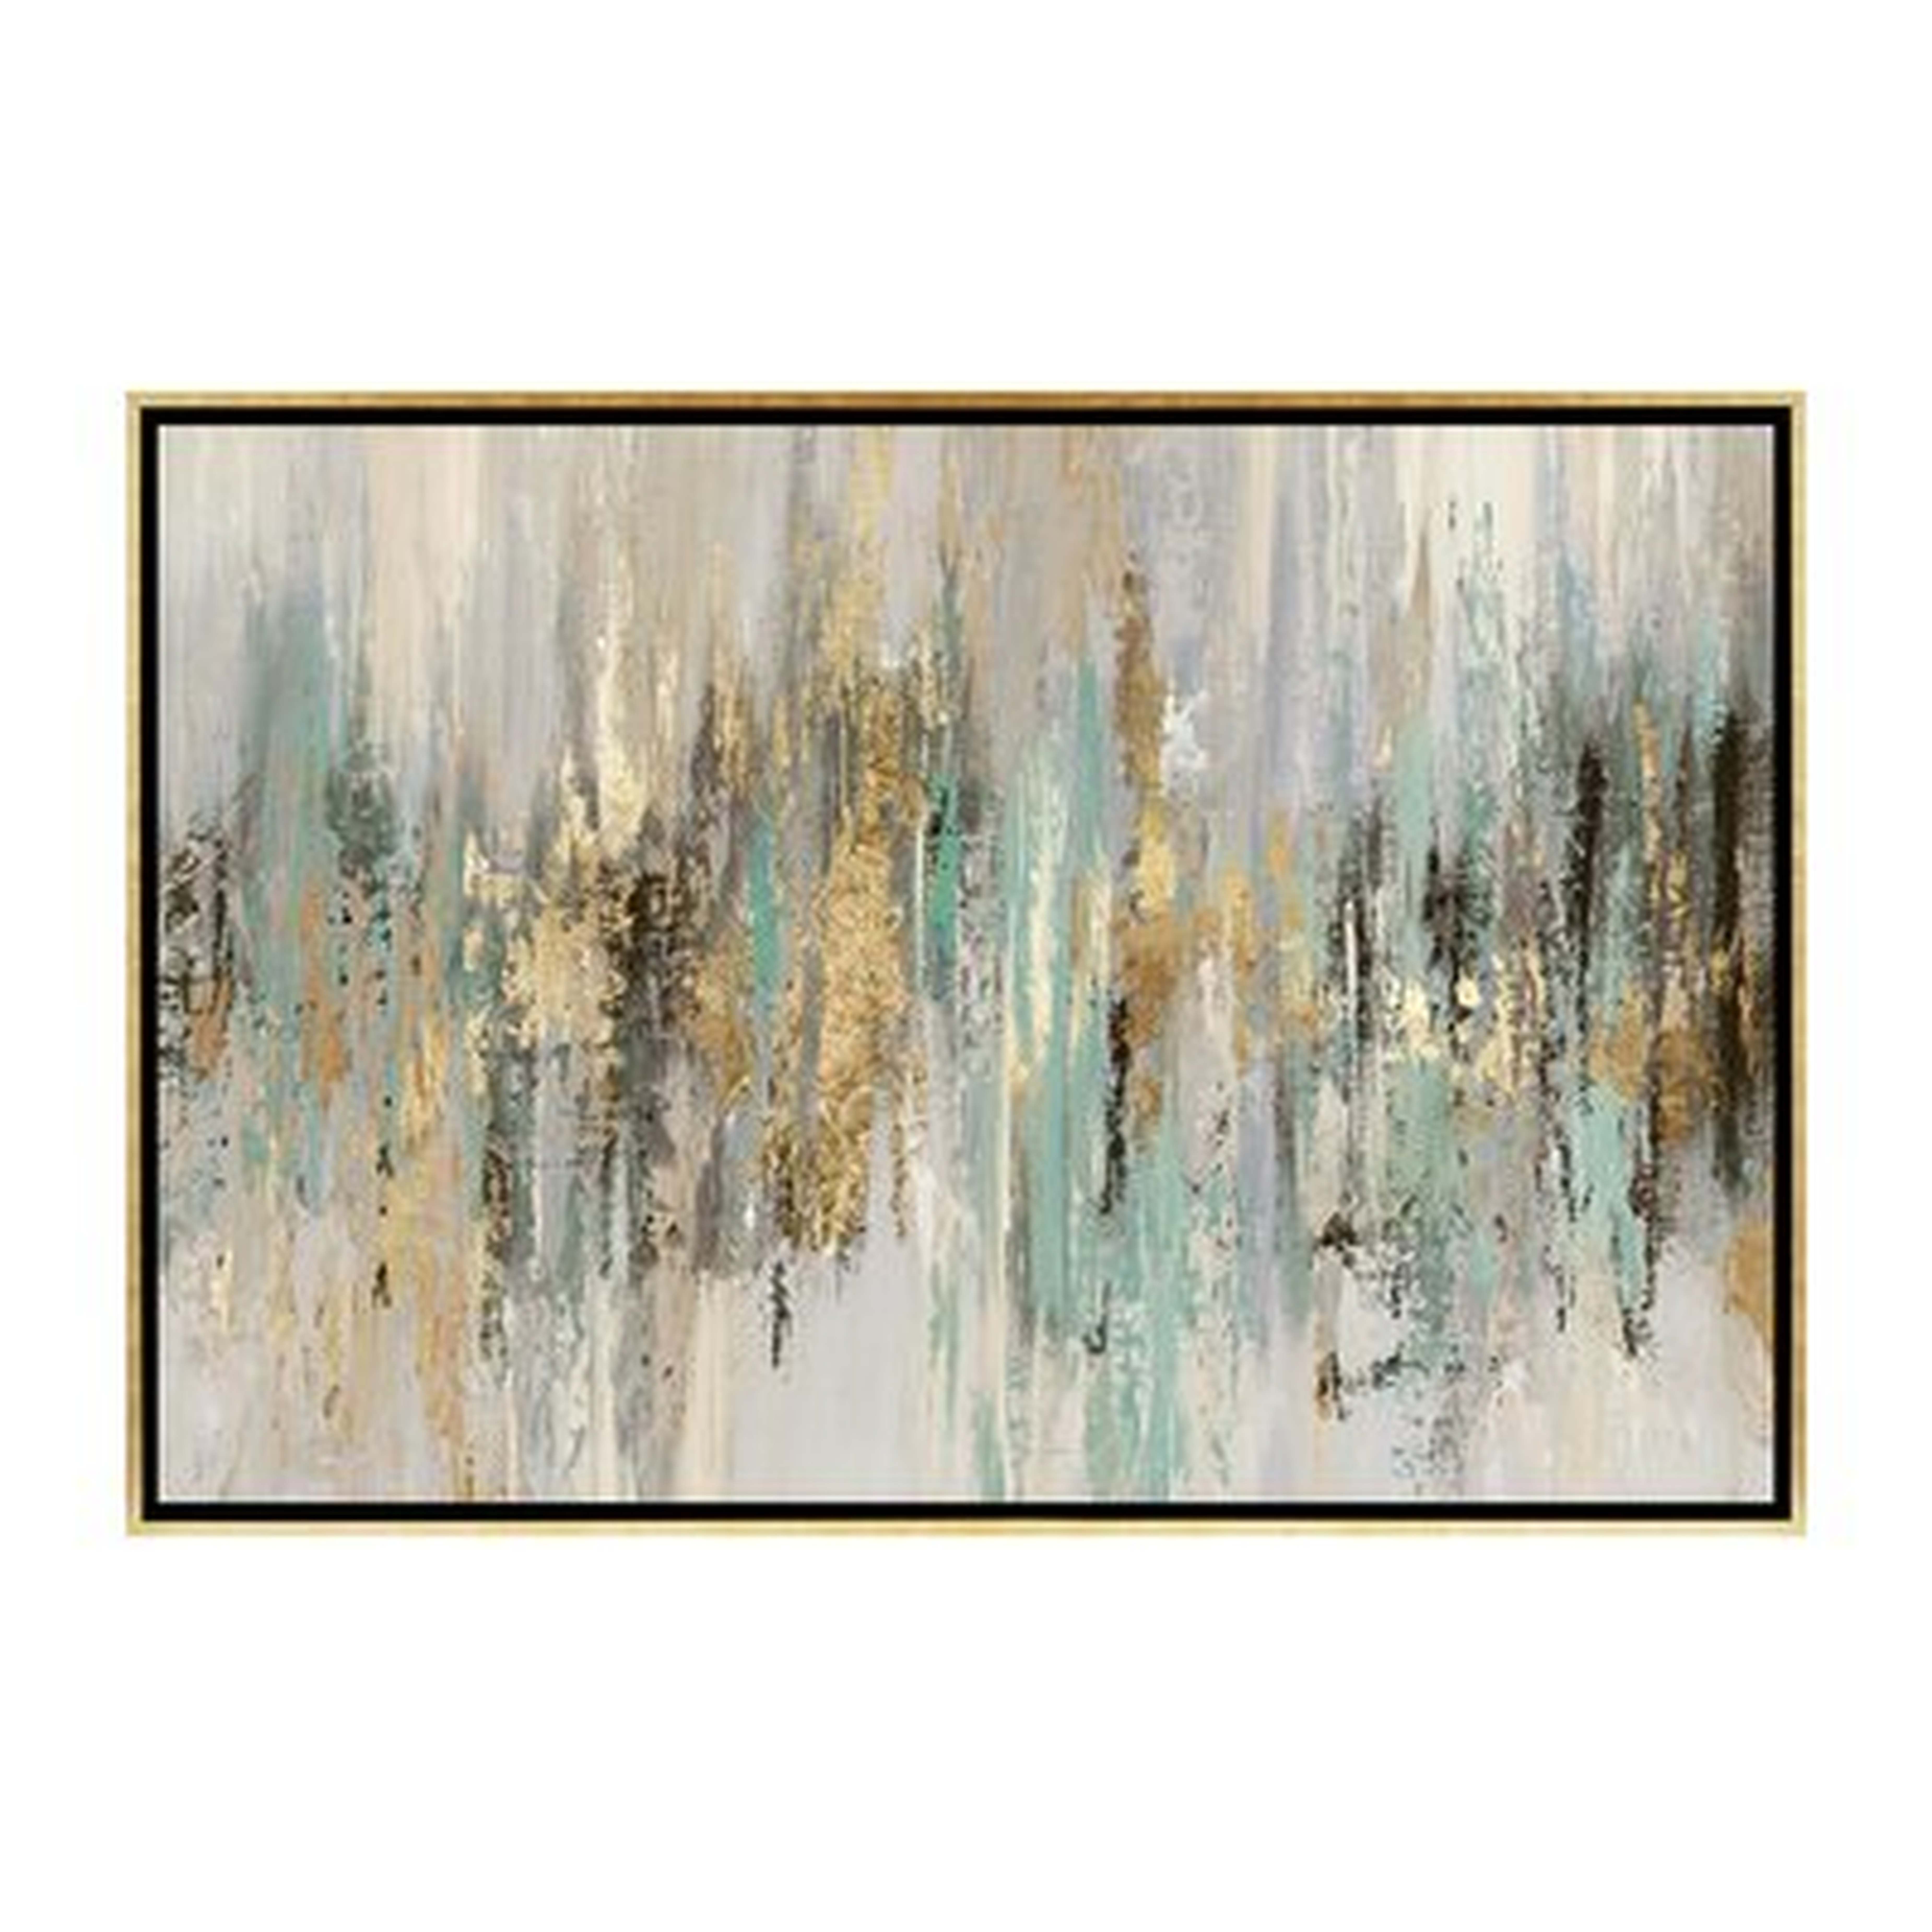 Dripping Gold I' by Tom Reeves - Picture Frame Print on Canvas - Wayfair